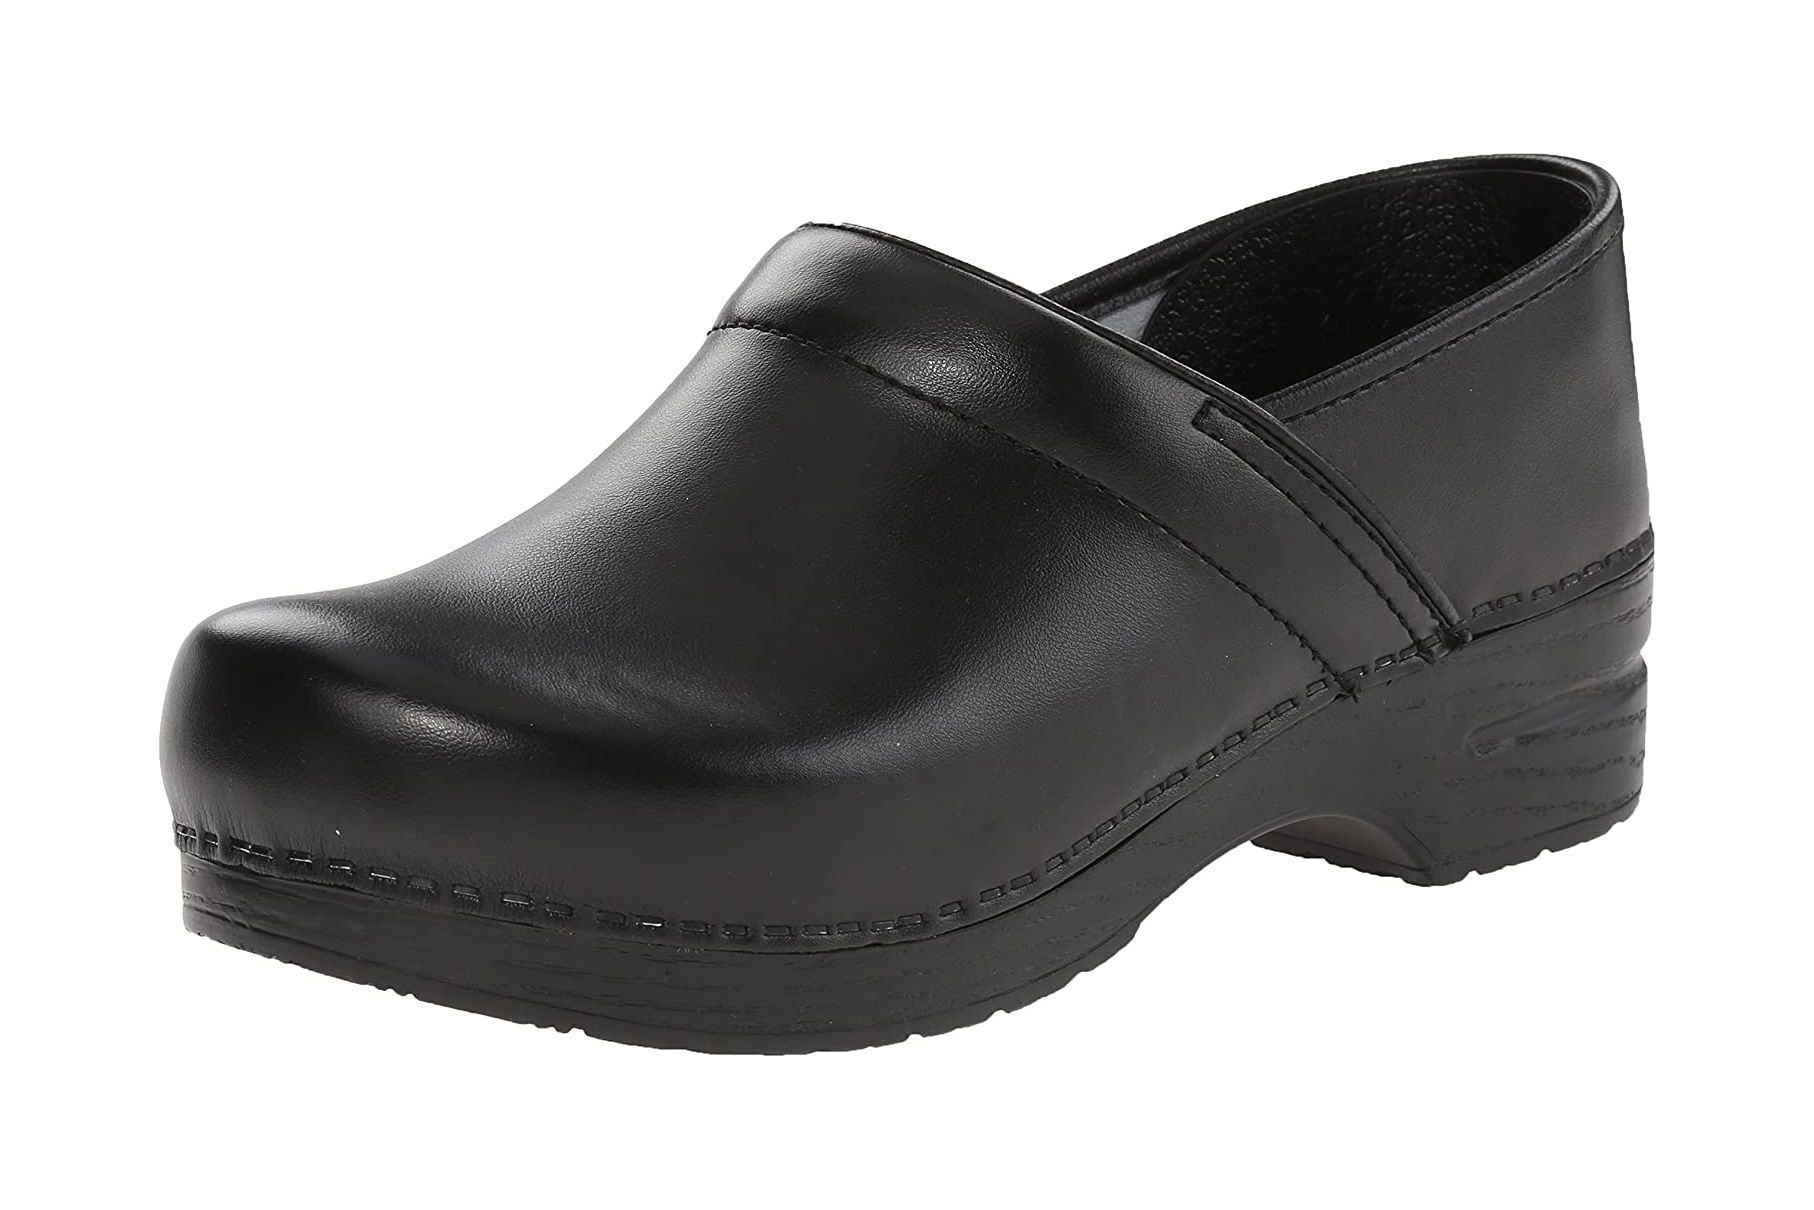 earthinglife Hospital Shoes for Nurses Lightweight Footwear Mules on Feet All Day Soft Comfortable 